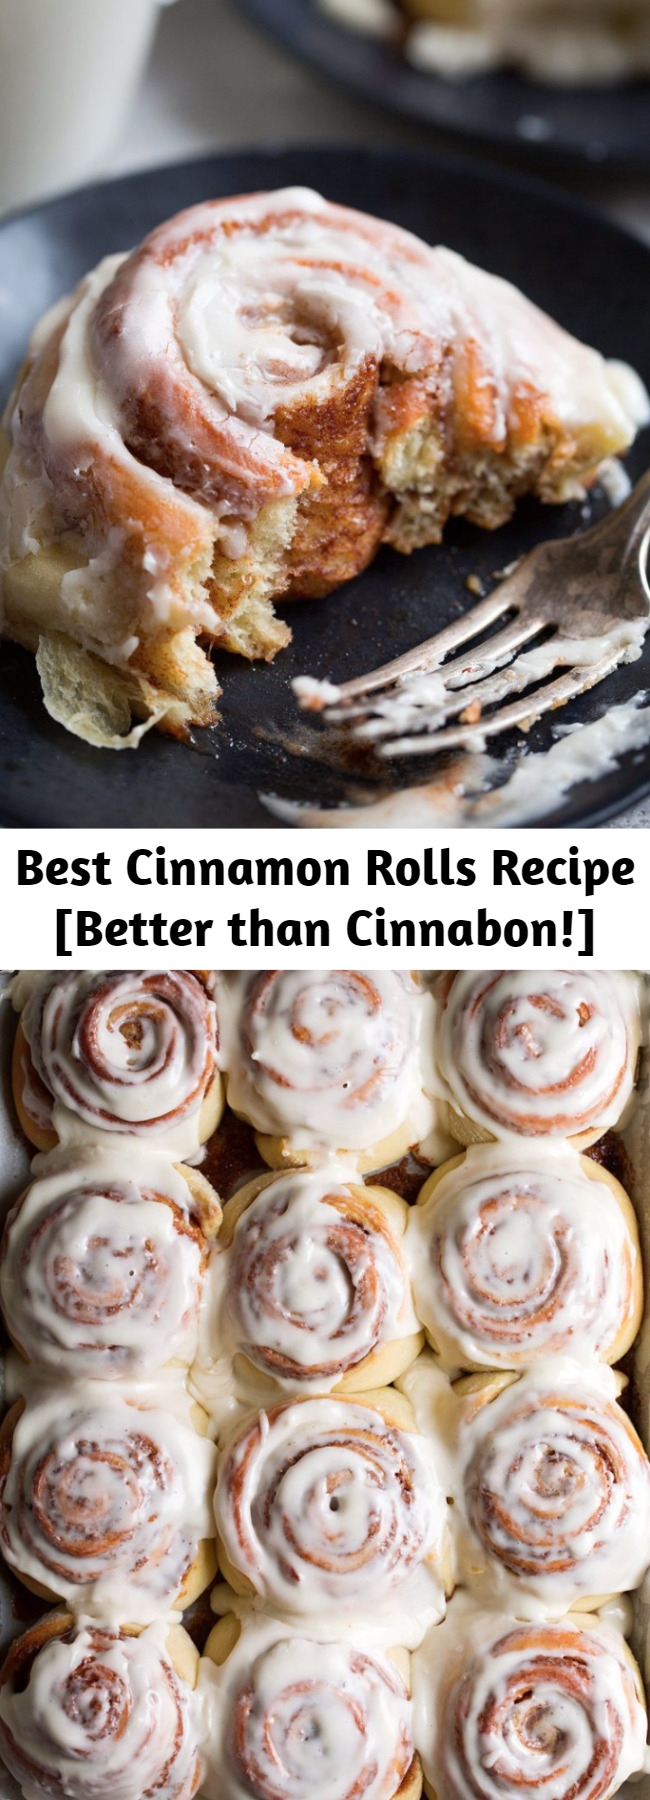 Best Cinnamon Rolls Recipe [Better than Cinnabon!] - My all time favorite cinnamon rolls! So soft and fluffy, and perfectly chewy with a hint of gooey. Their sweetness is perfectly paired with a hint of buttermilk flavor and a cream cheese icing. And they are jam packed with the best cinnamon flavor! A recipe you won't want to lose. #cinnamonrolls #breakfast #dessert #bake #homemade #dough #diy #rolls